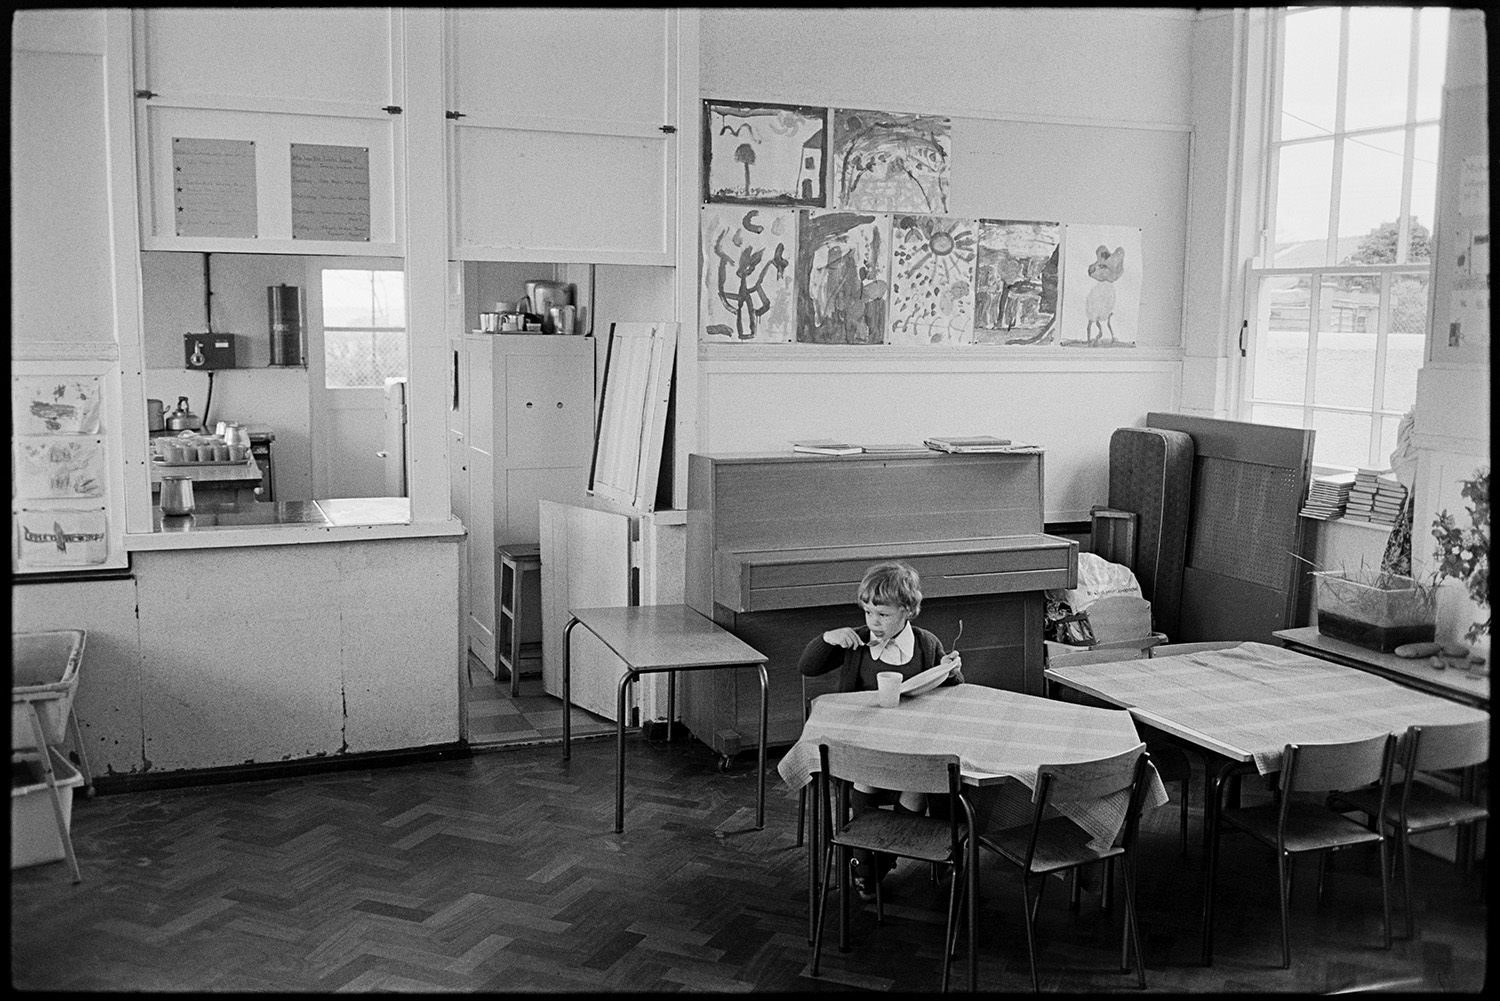 In and out of school with children playing. 
[A child eating at a table in the hall at Kings Nympton Primary School. A piano and serving hatch to the school kitchen can be seen in the background. Children's artwork is displayed on the wall.]